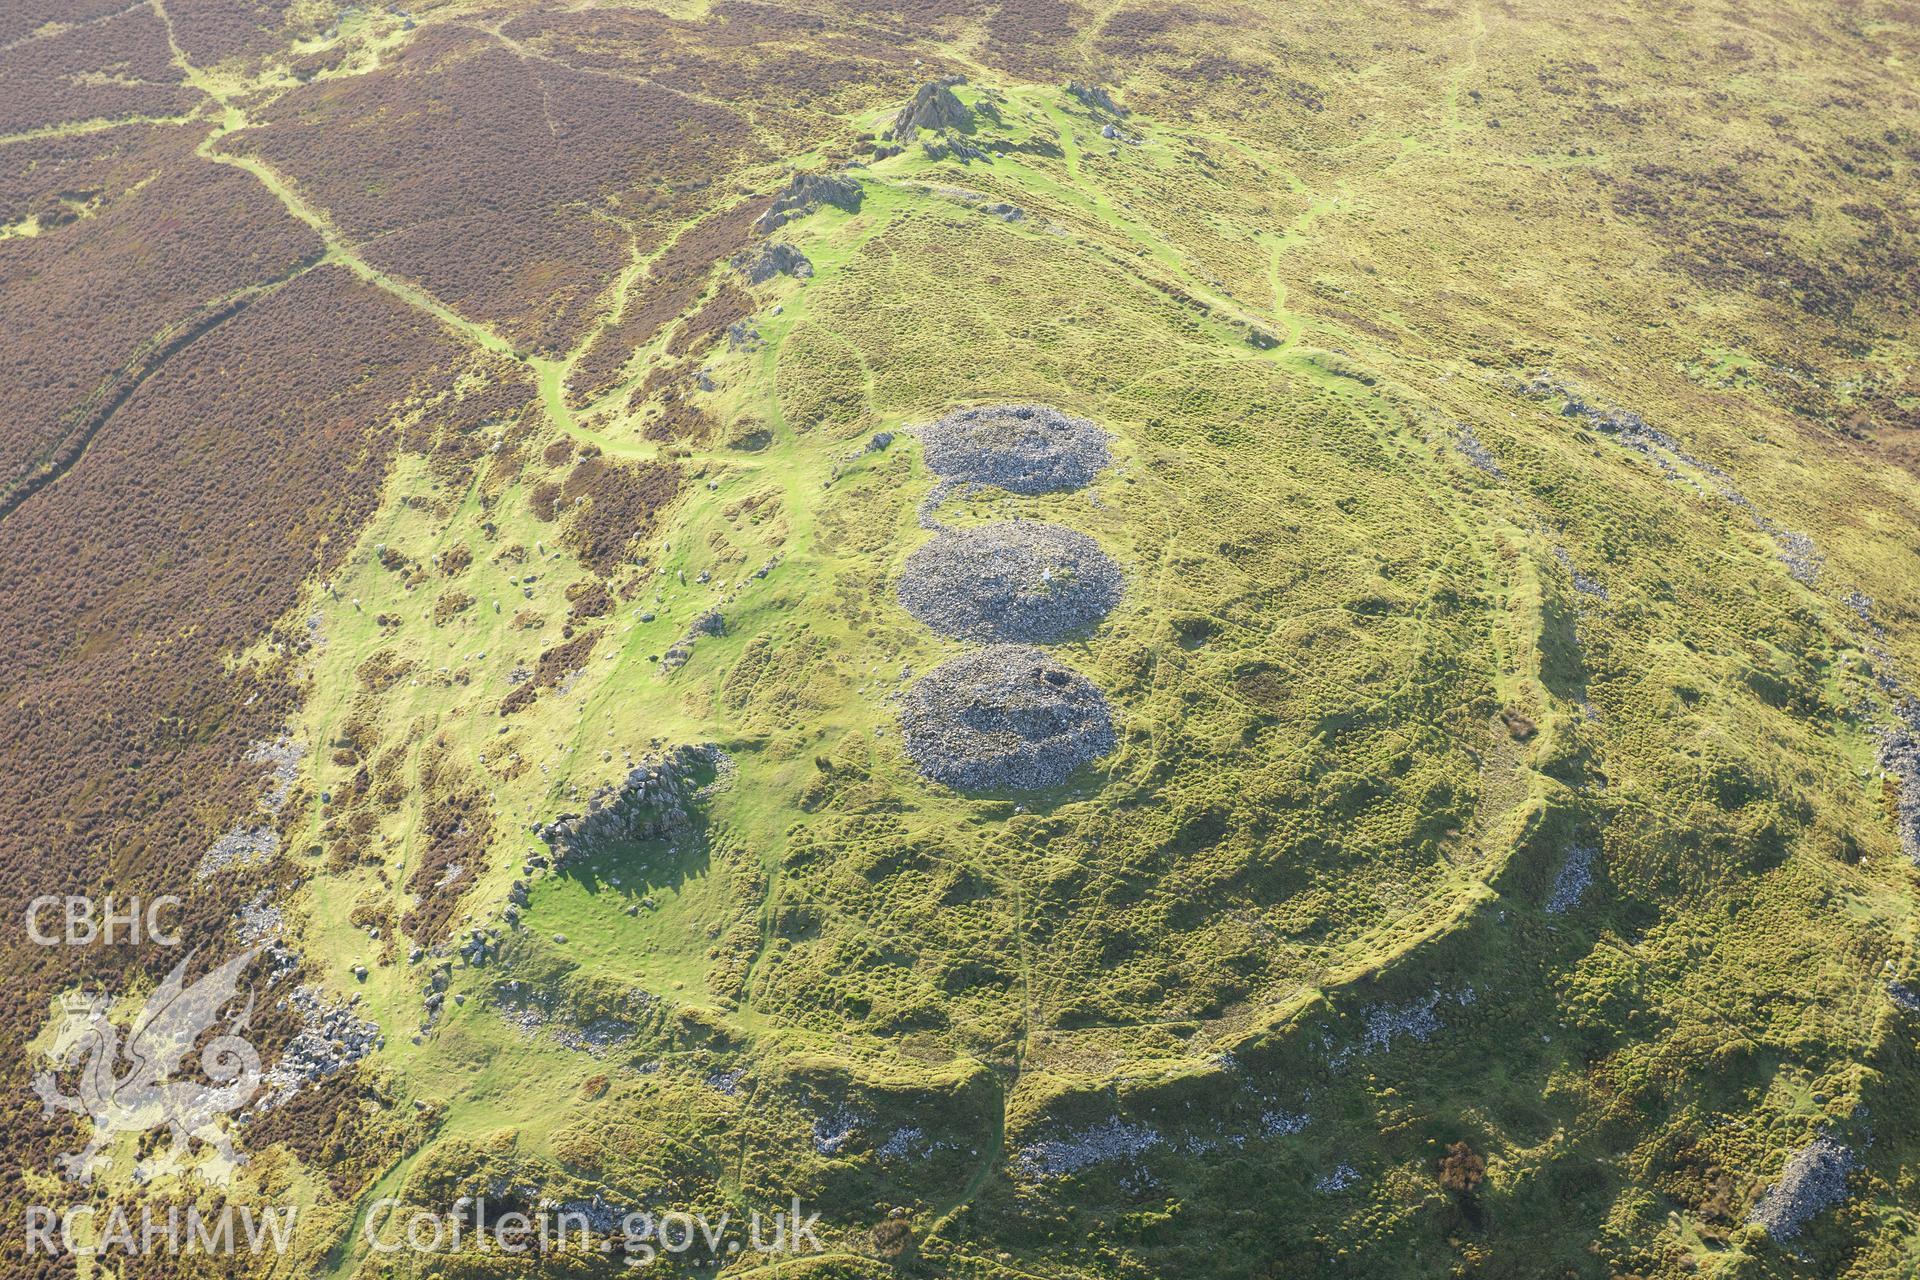 RCAHMW colour oblique photograph of  Foel Drygarn Camp. Taken by Toby Driver on 26/10/2012.